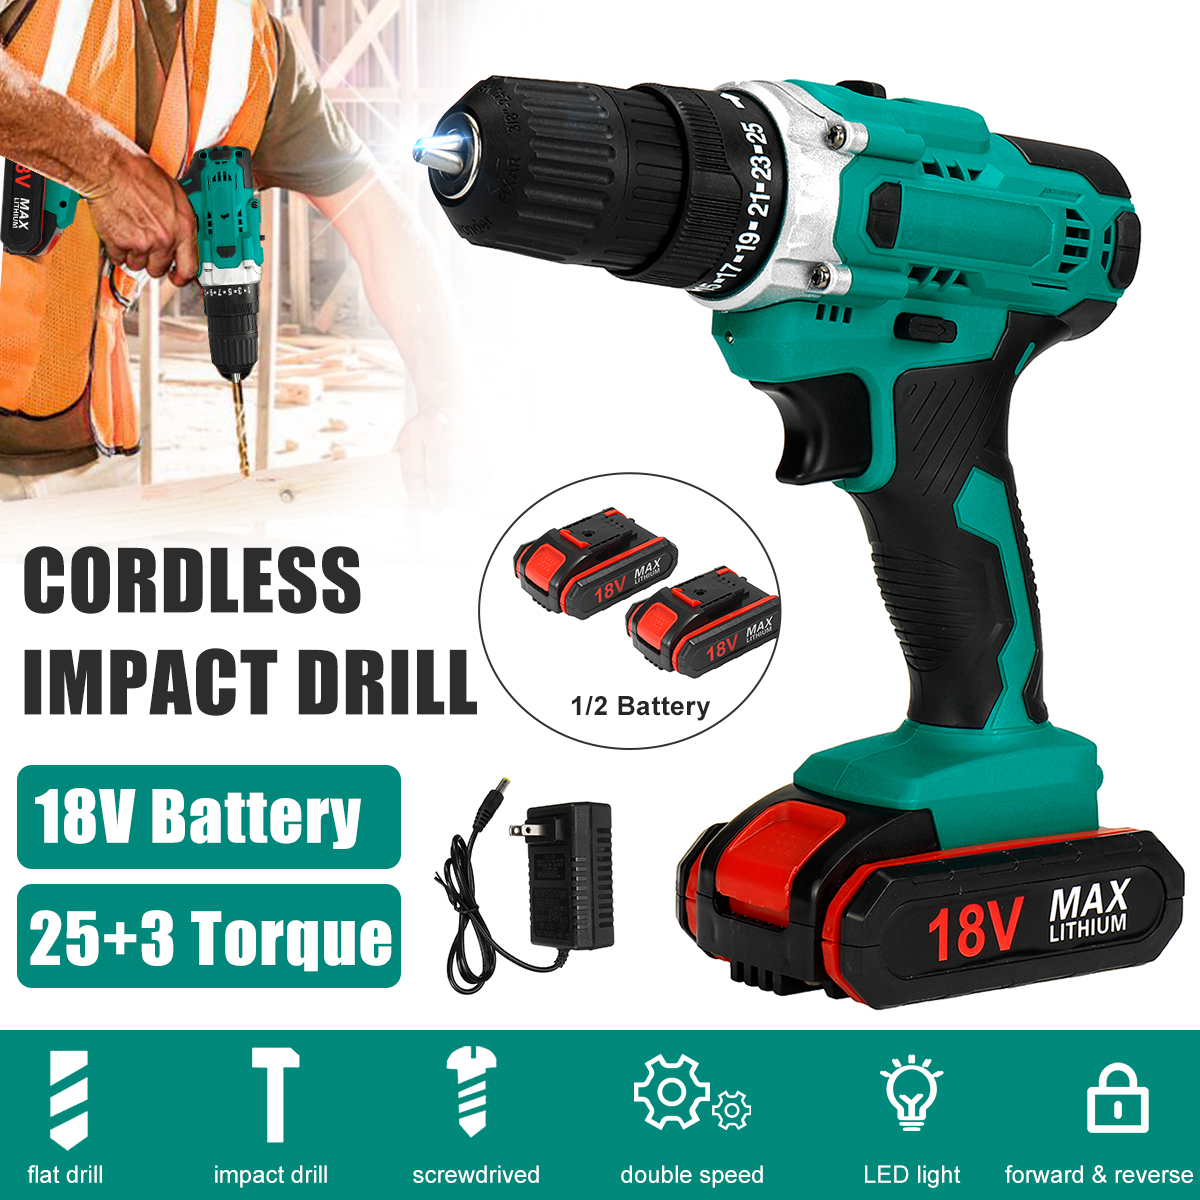 Multifunctional-3In1-Cordless-Electric-Screw-Driver-Drill-Wrench-38-Inch-Chuck-Rechargeable-Impact-D-1837415-1